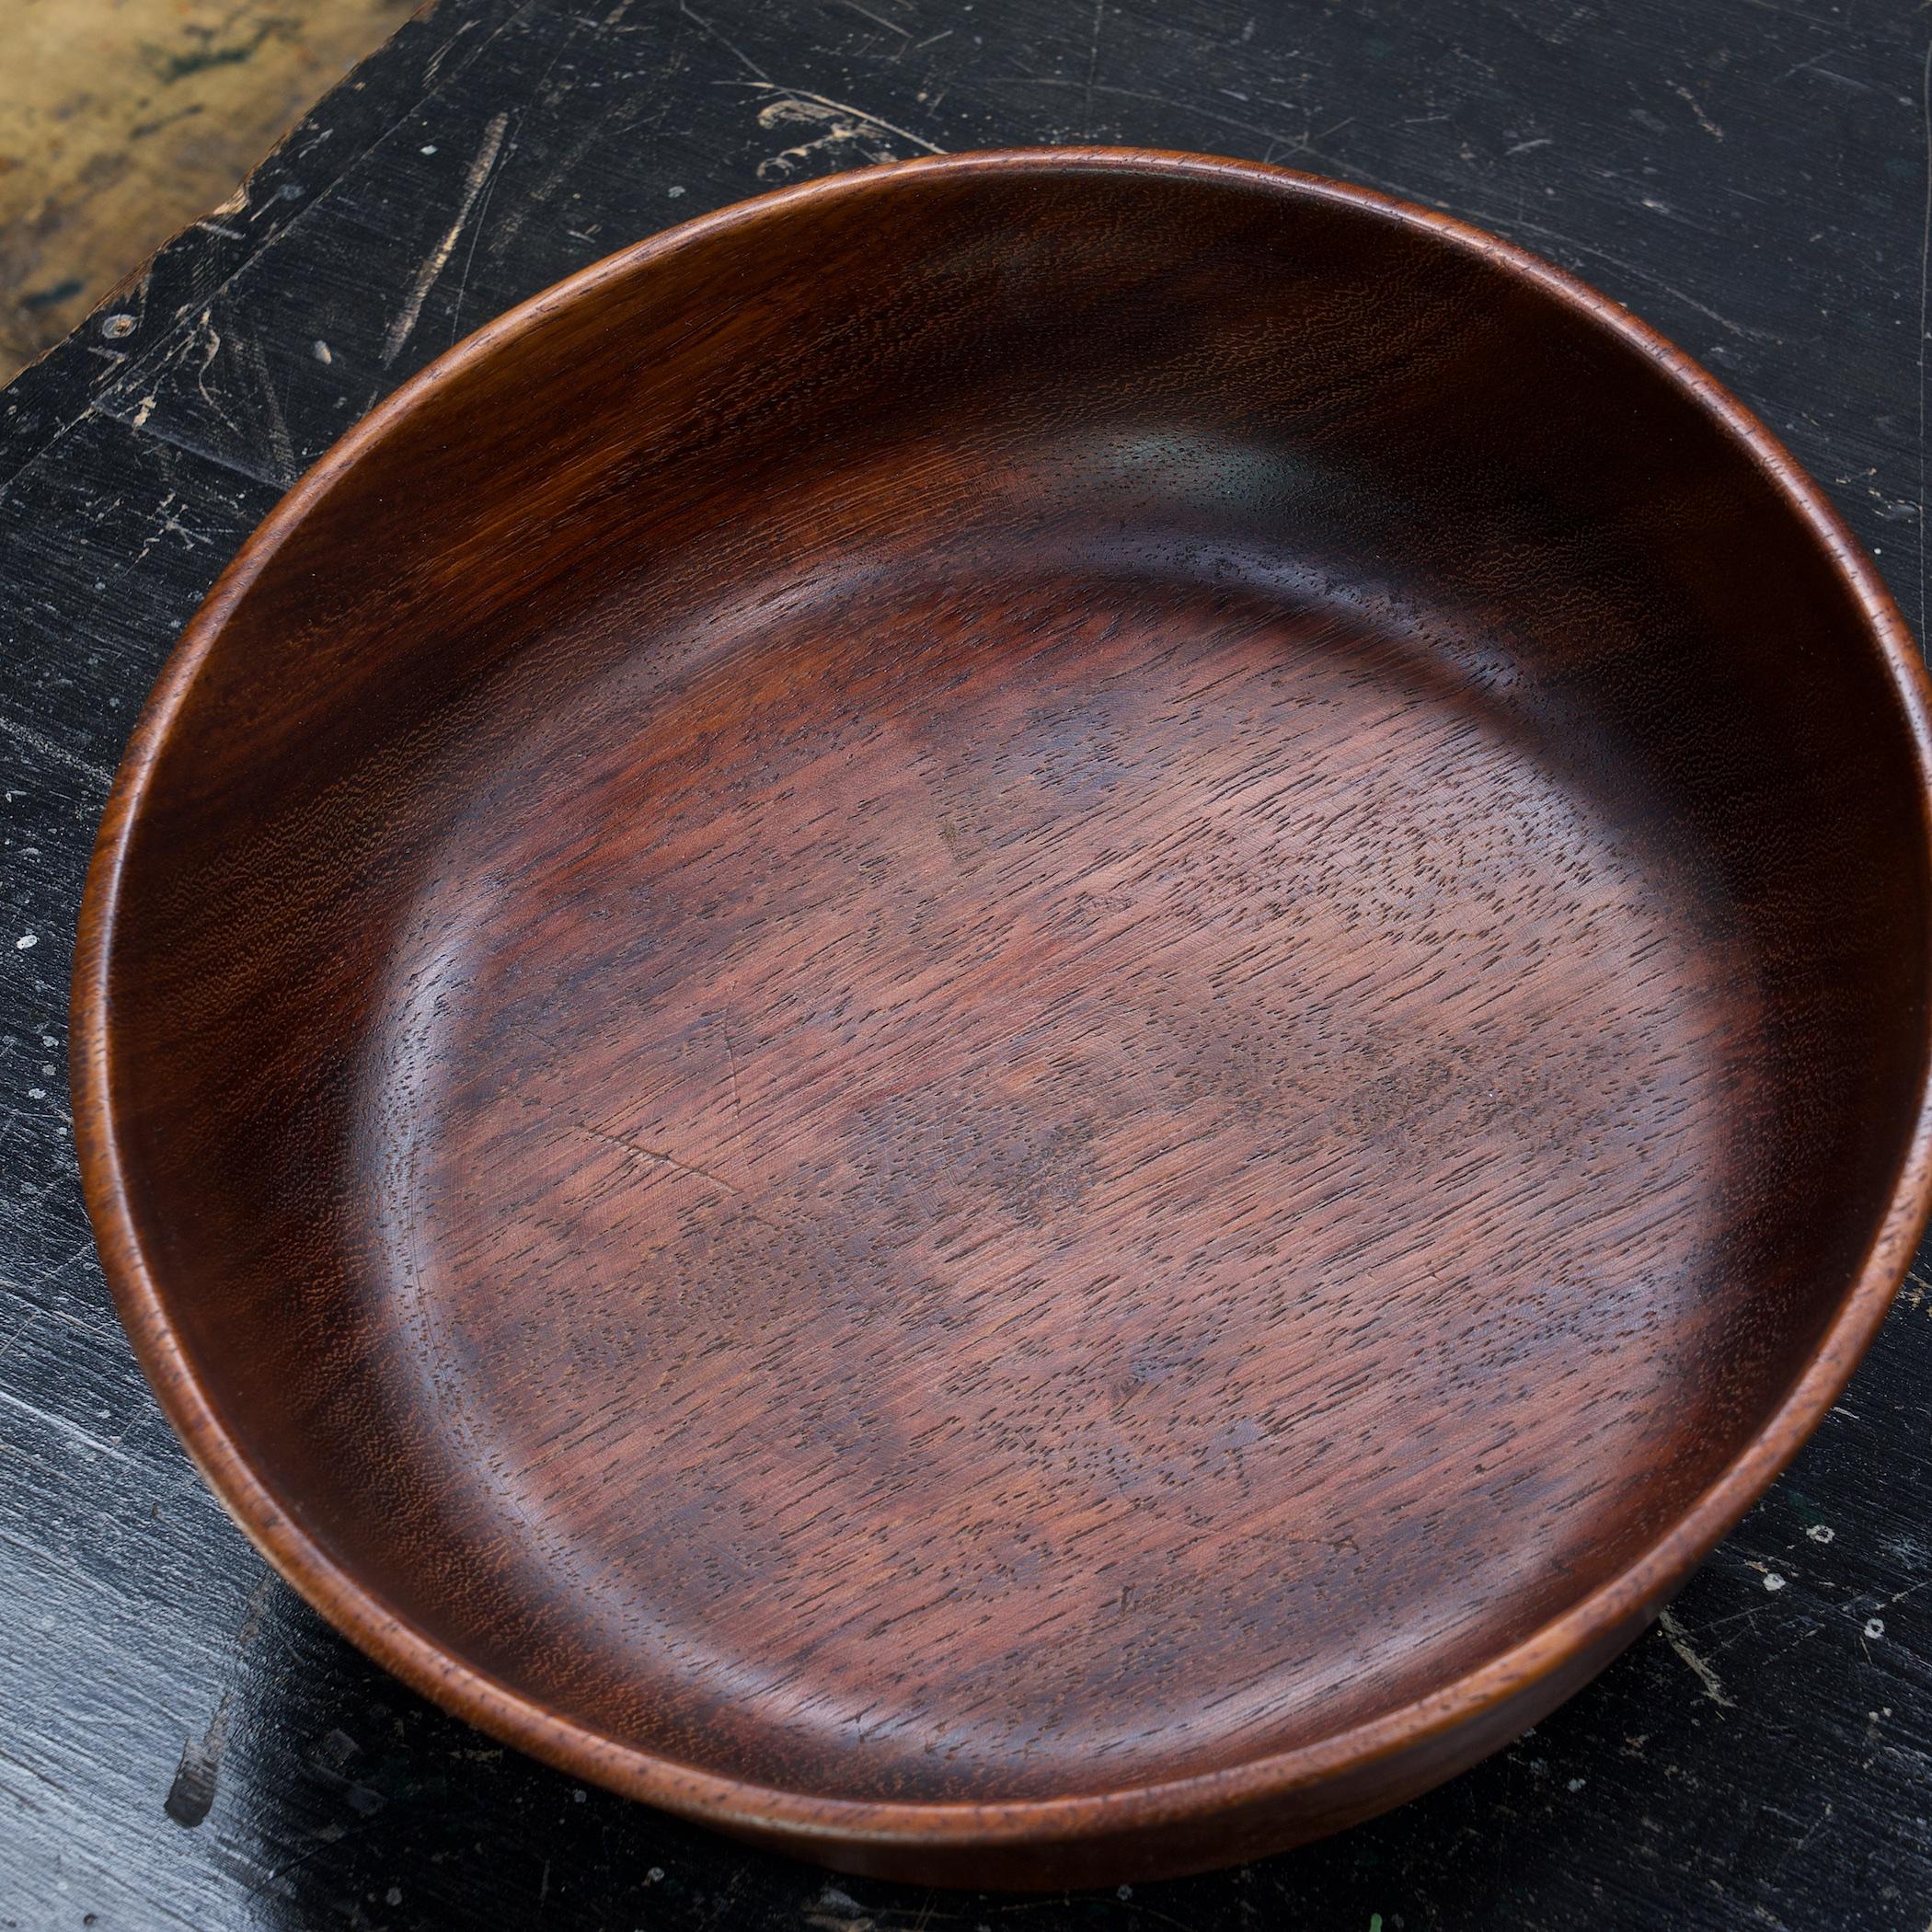 American Modern Turned Mahogany Wood Fruit Centerpiece Bowl  In Fair Condition For Sale In Hyattsville, MD